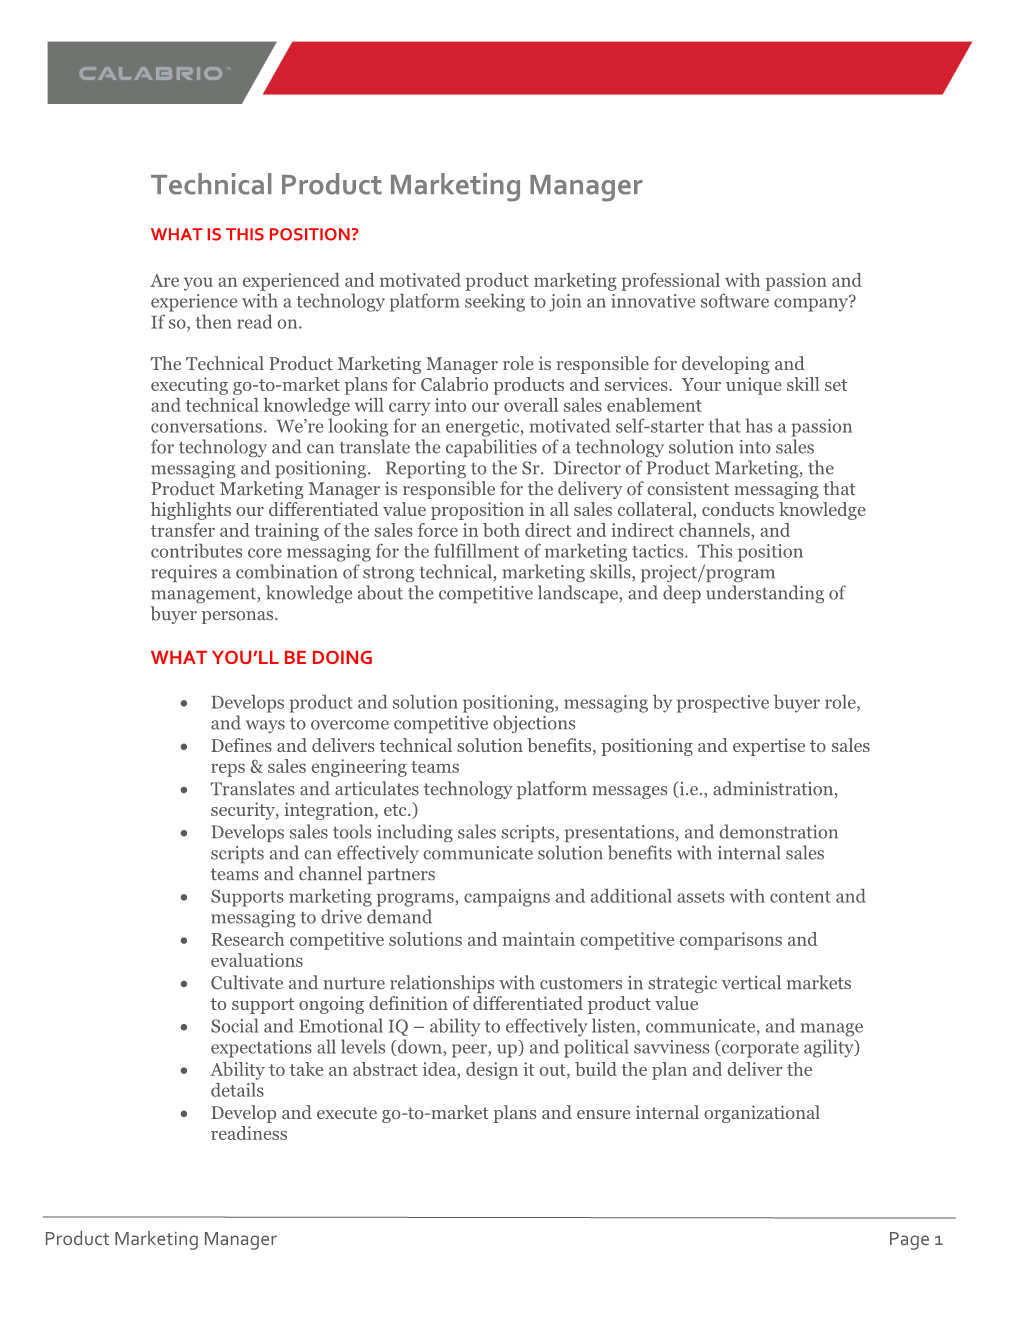 Technical Product Marketing Manager